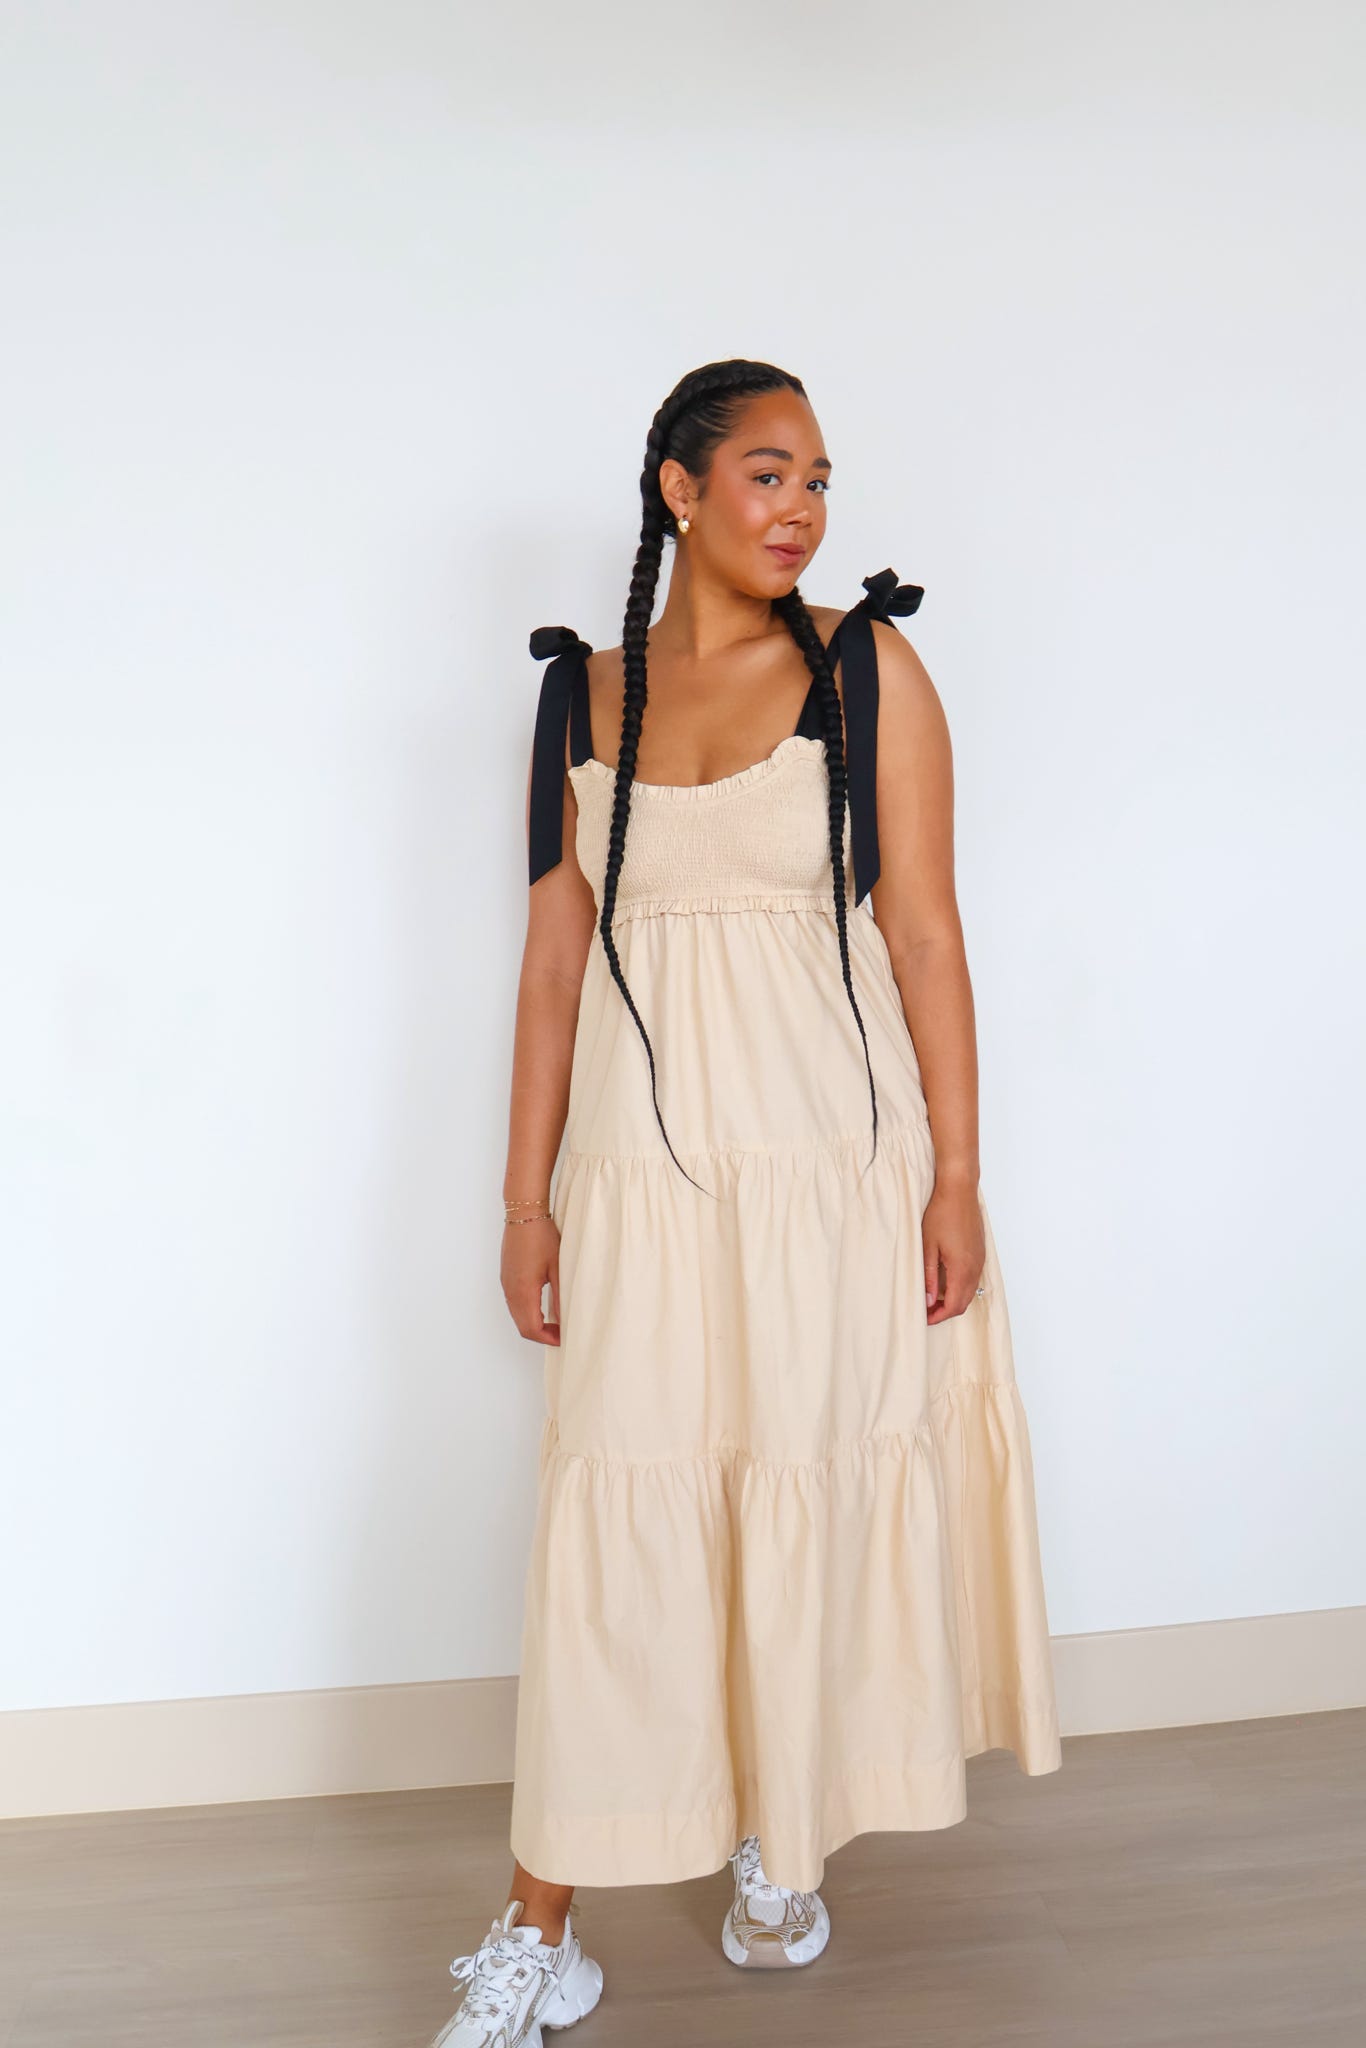 Happily Yours Bow Tie Maxi Dress